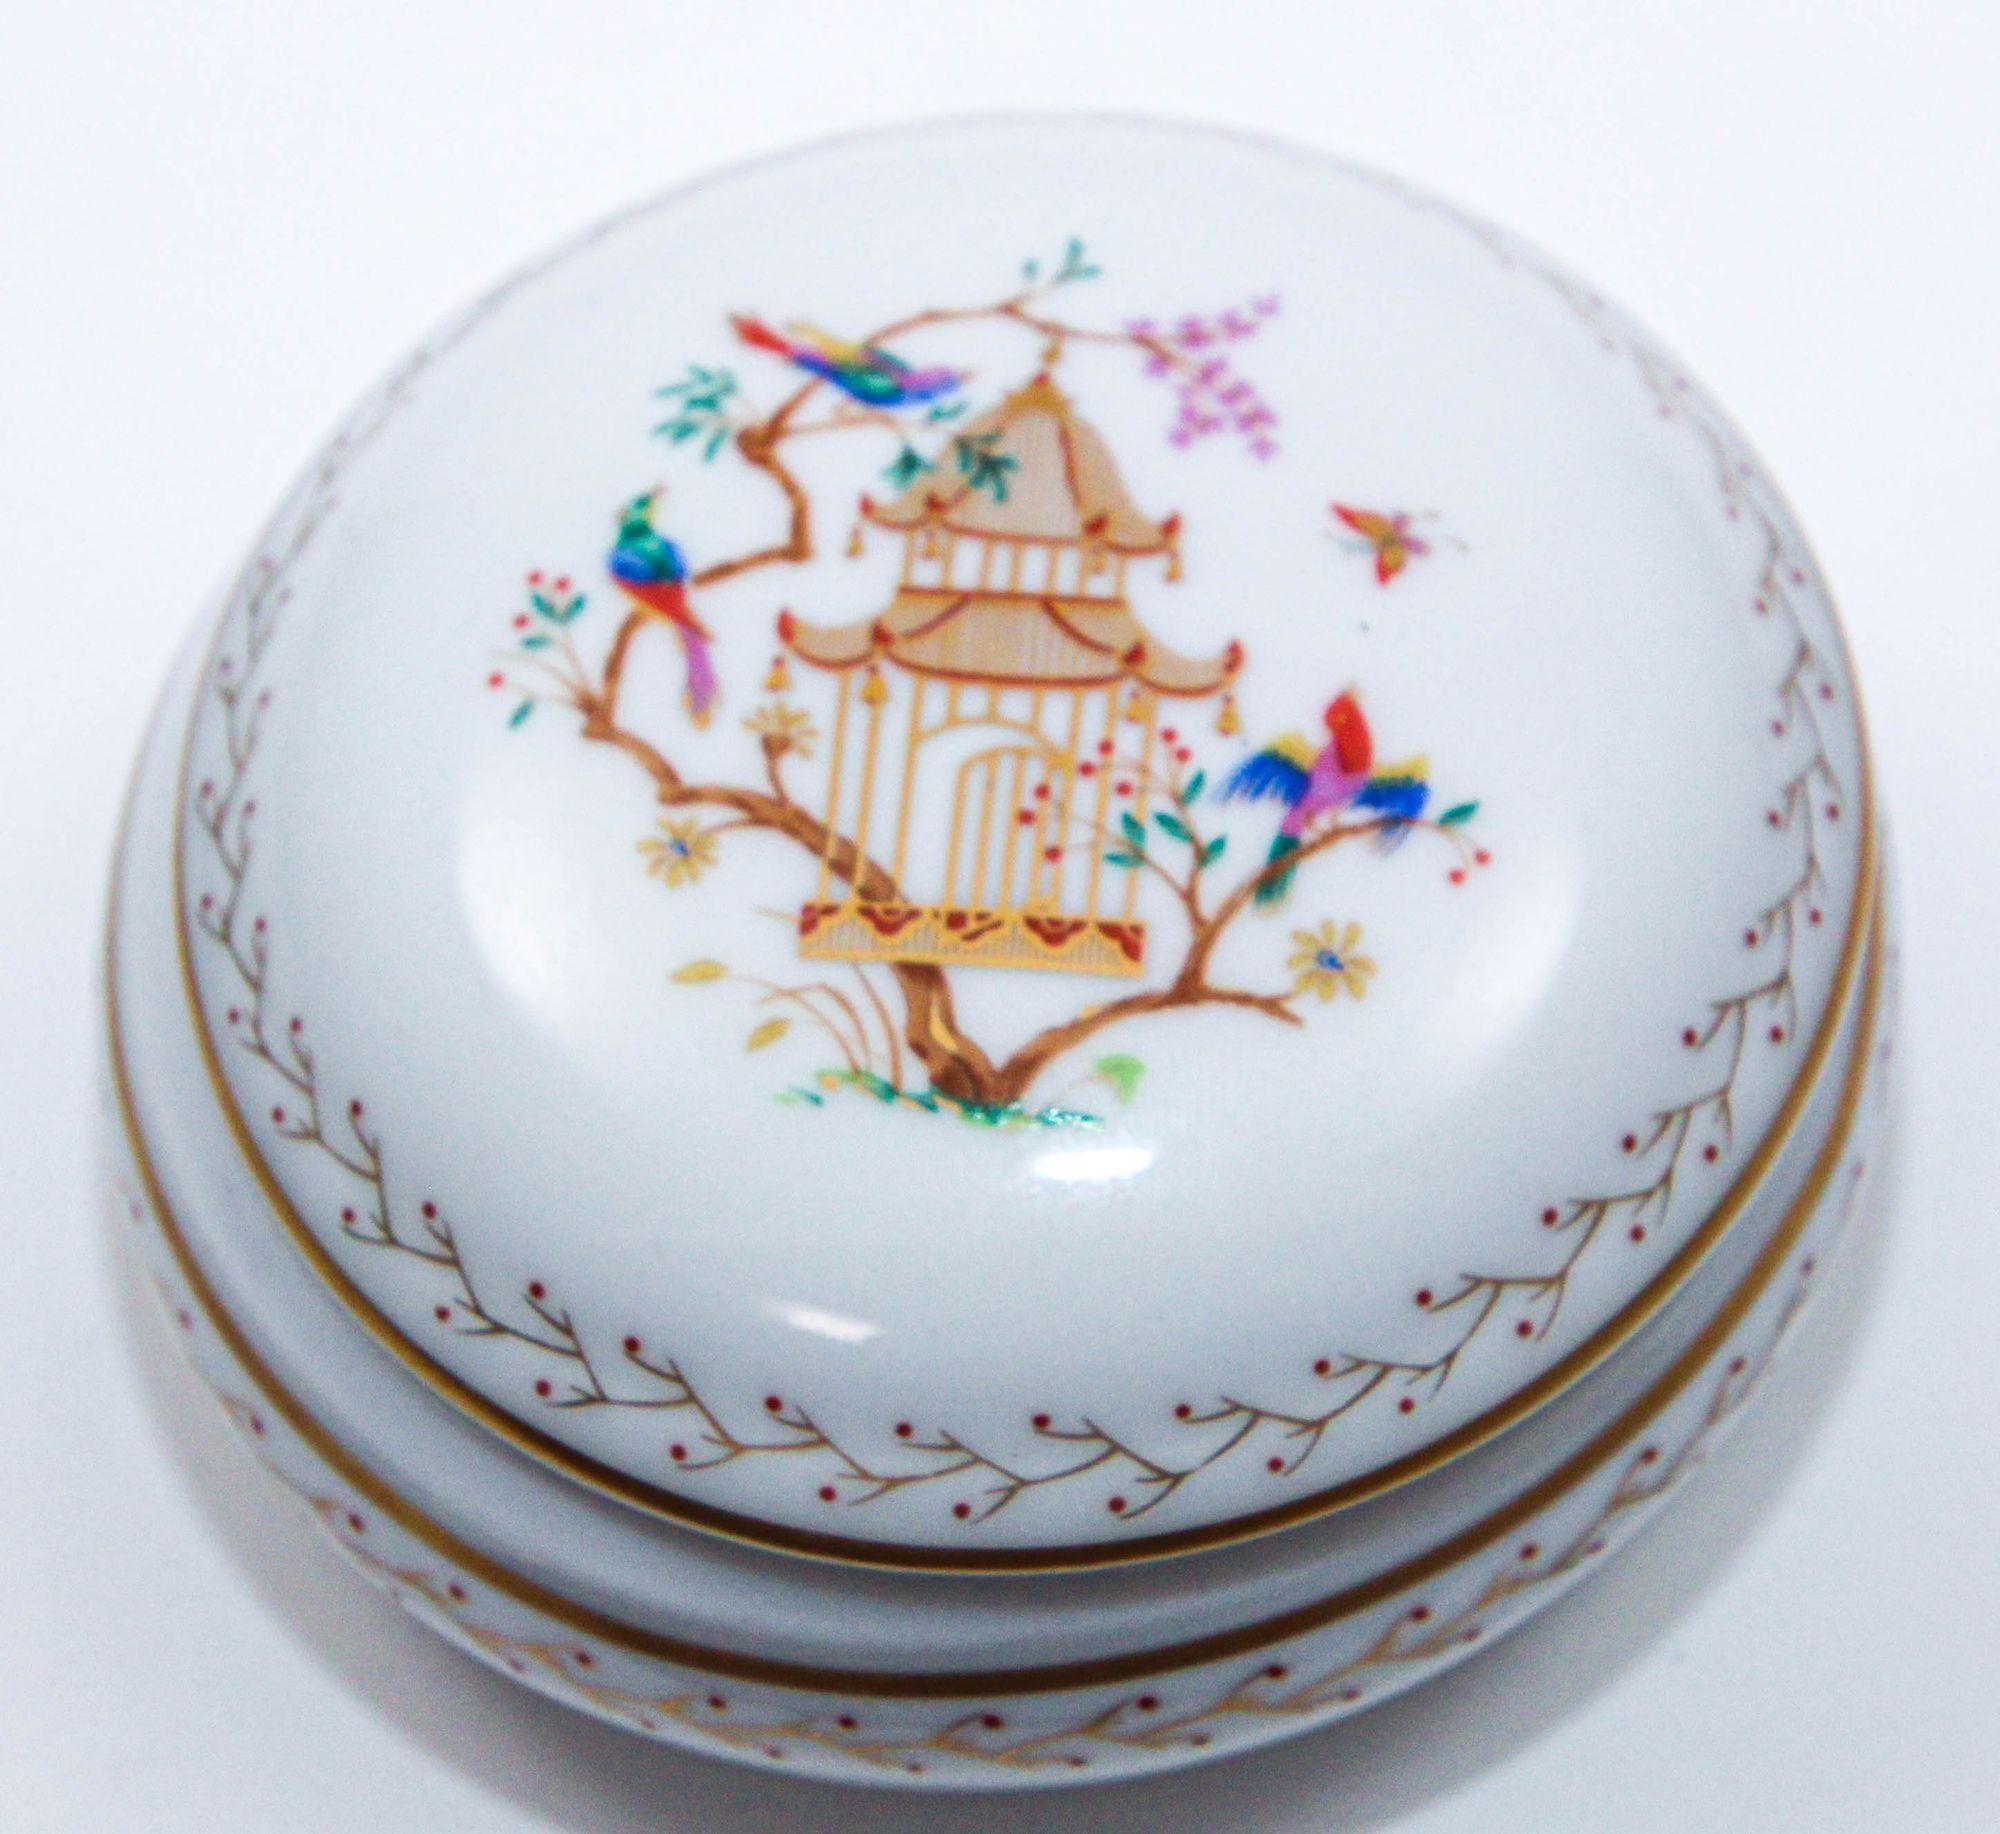 Audubon by TIFFANY & Co Limoges Porcelain Vanity Trinket Box Chinoiserie Decor In Good Condition For Sale In North Hollywood, CA